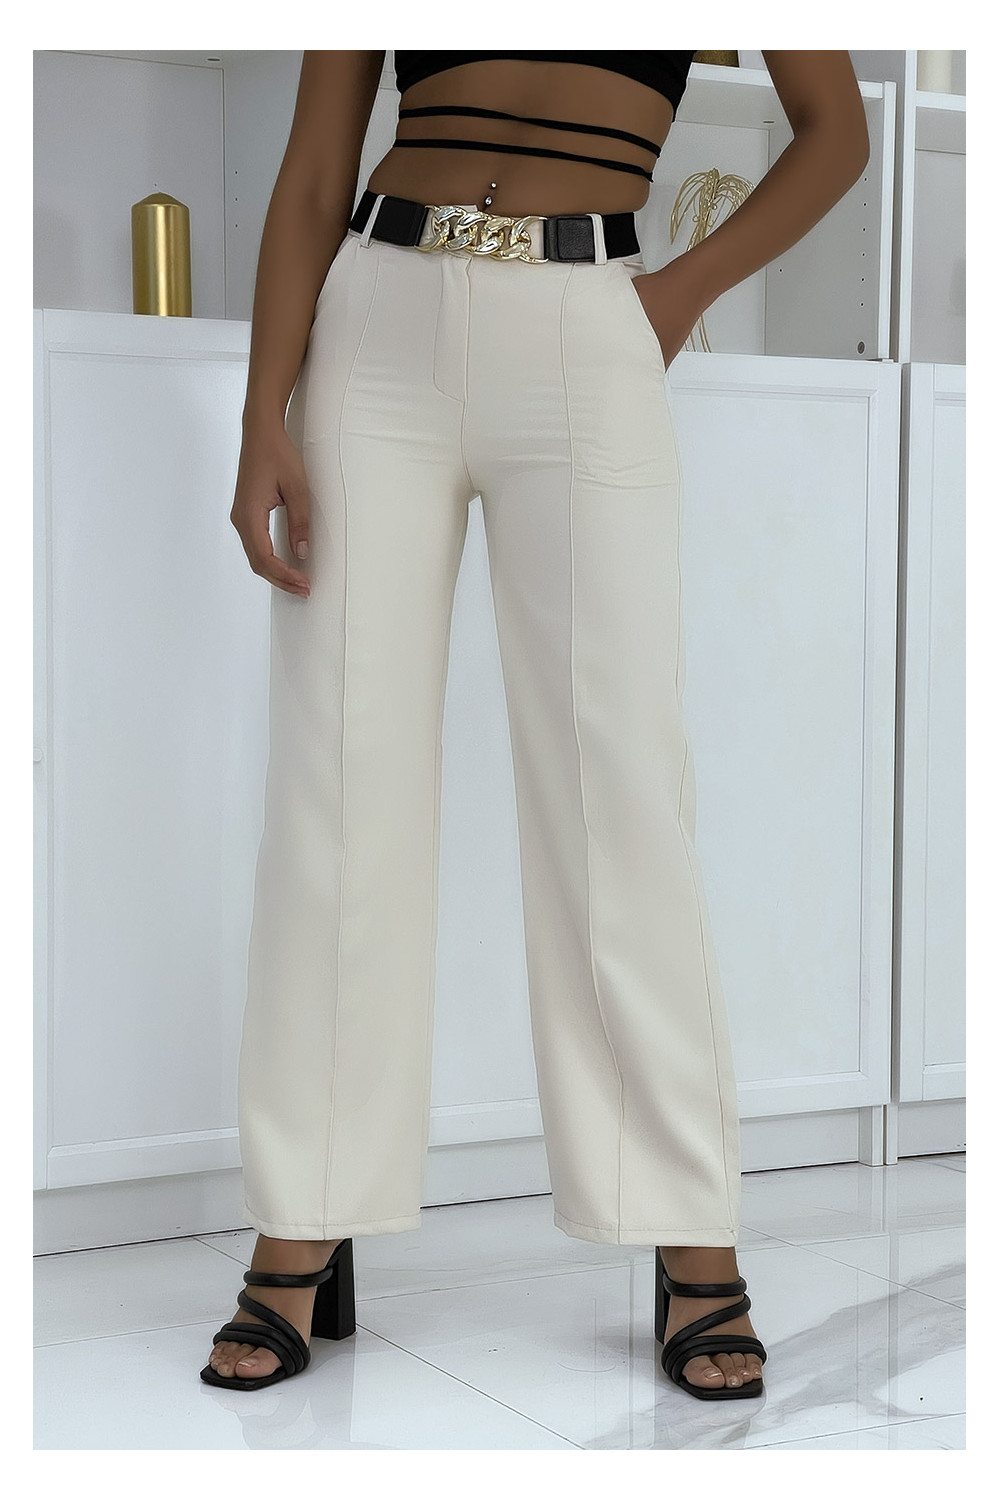 Beige palazzo pants with belt pockets and pleats